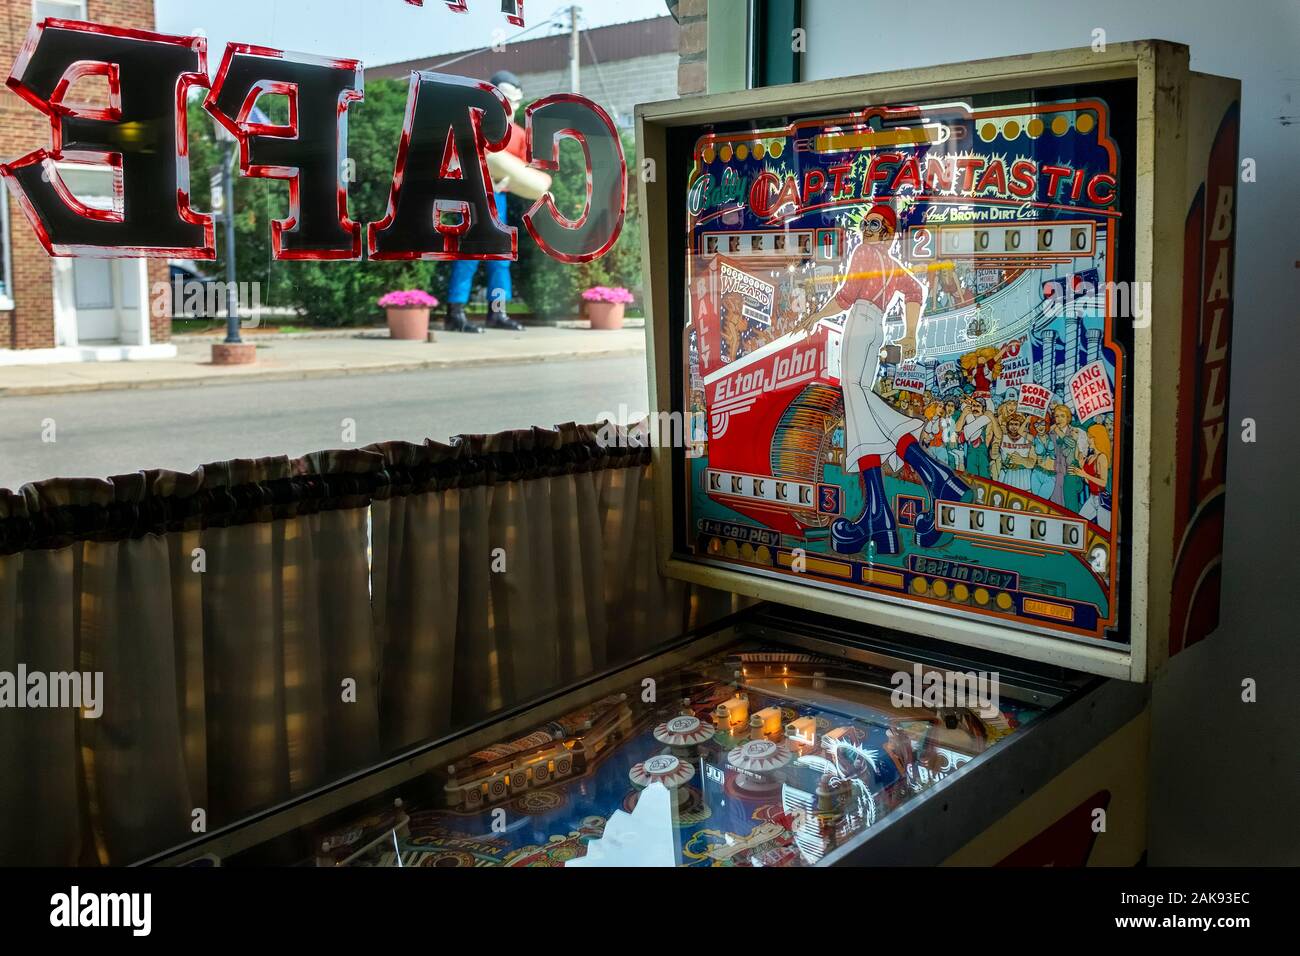 Atlanta, Illinois, USA - July 5, 2014: An old pinball machine at a café along the historic route 66 in the city of Atlanta, in the State of Illinois, Stock Photo